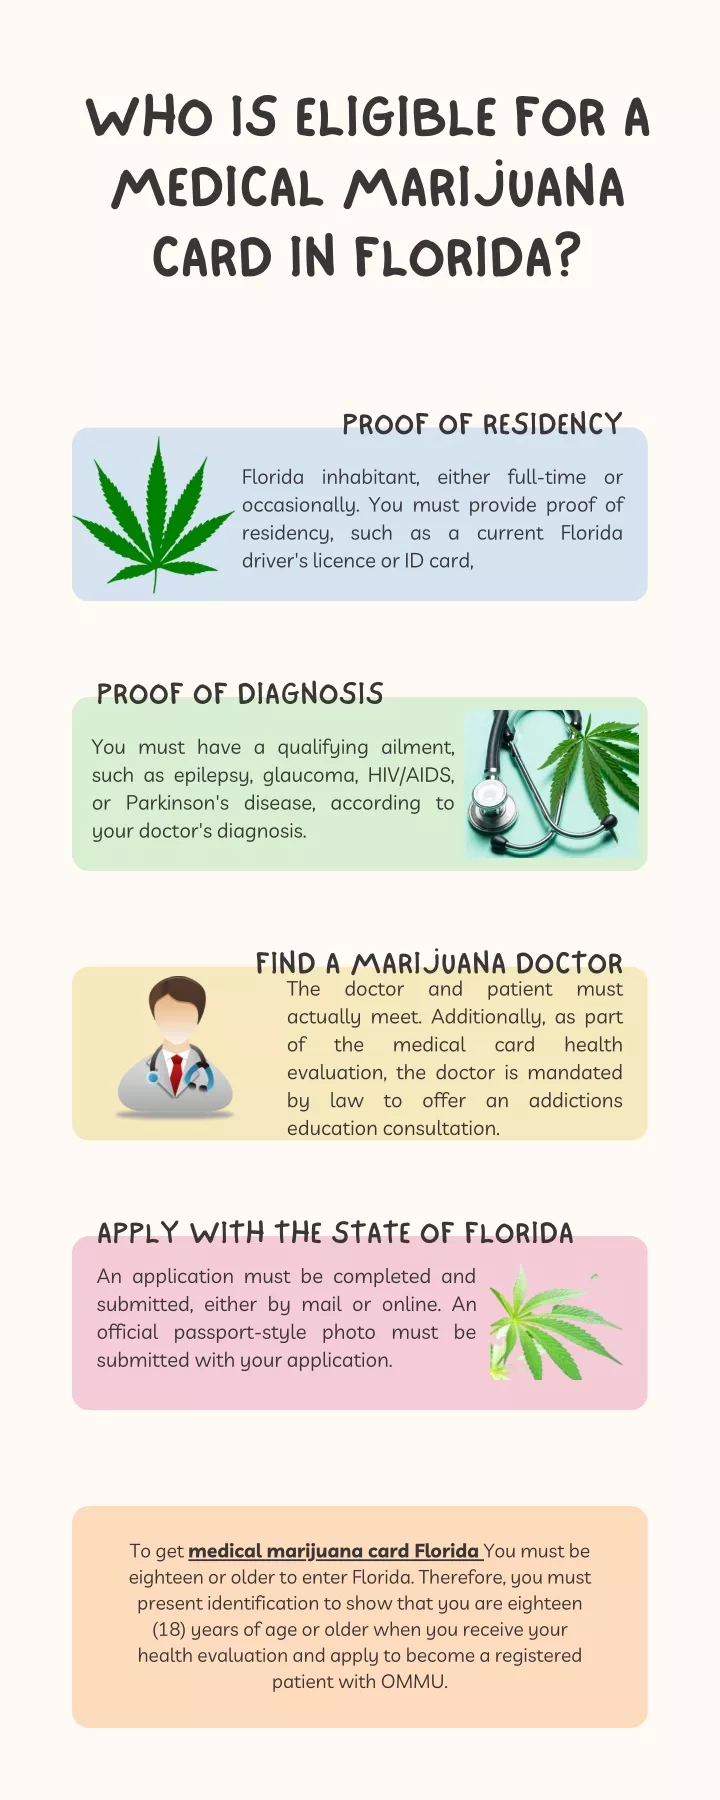 who is eligible for a medical marijuana card